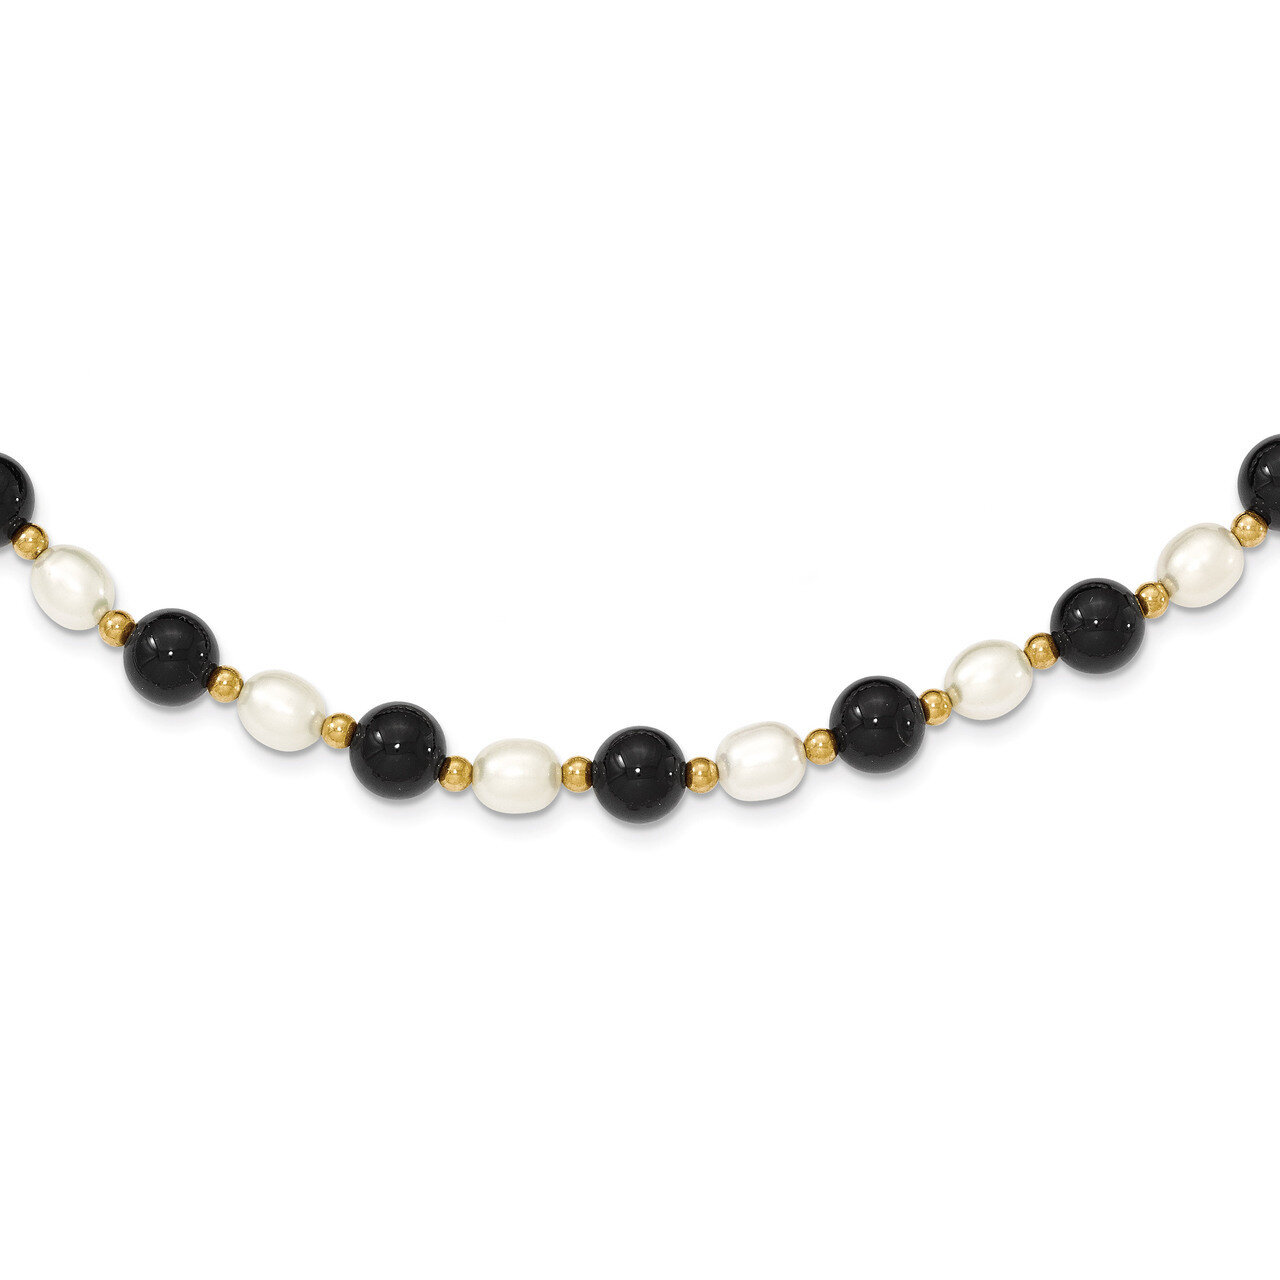 Fancy 6-6.5mm White Cultured Pearl & Onyx Necklace 17 Inch 14k Gold Polished PR34-17